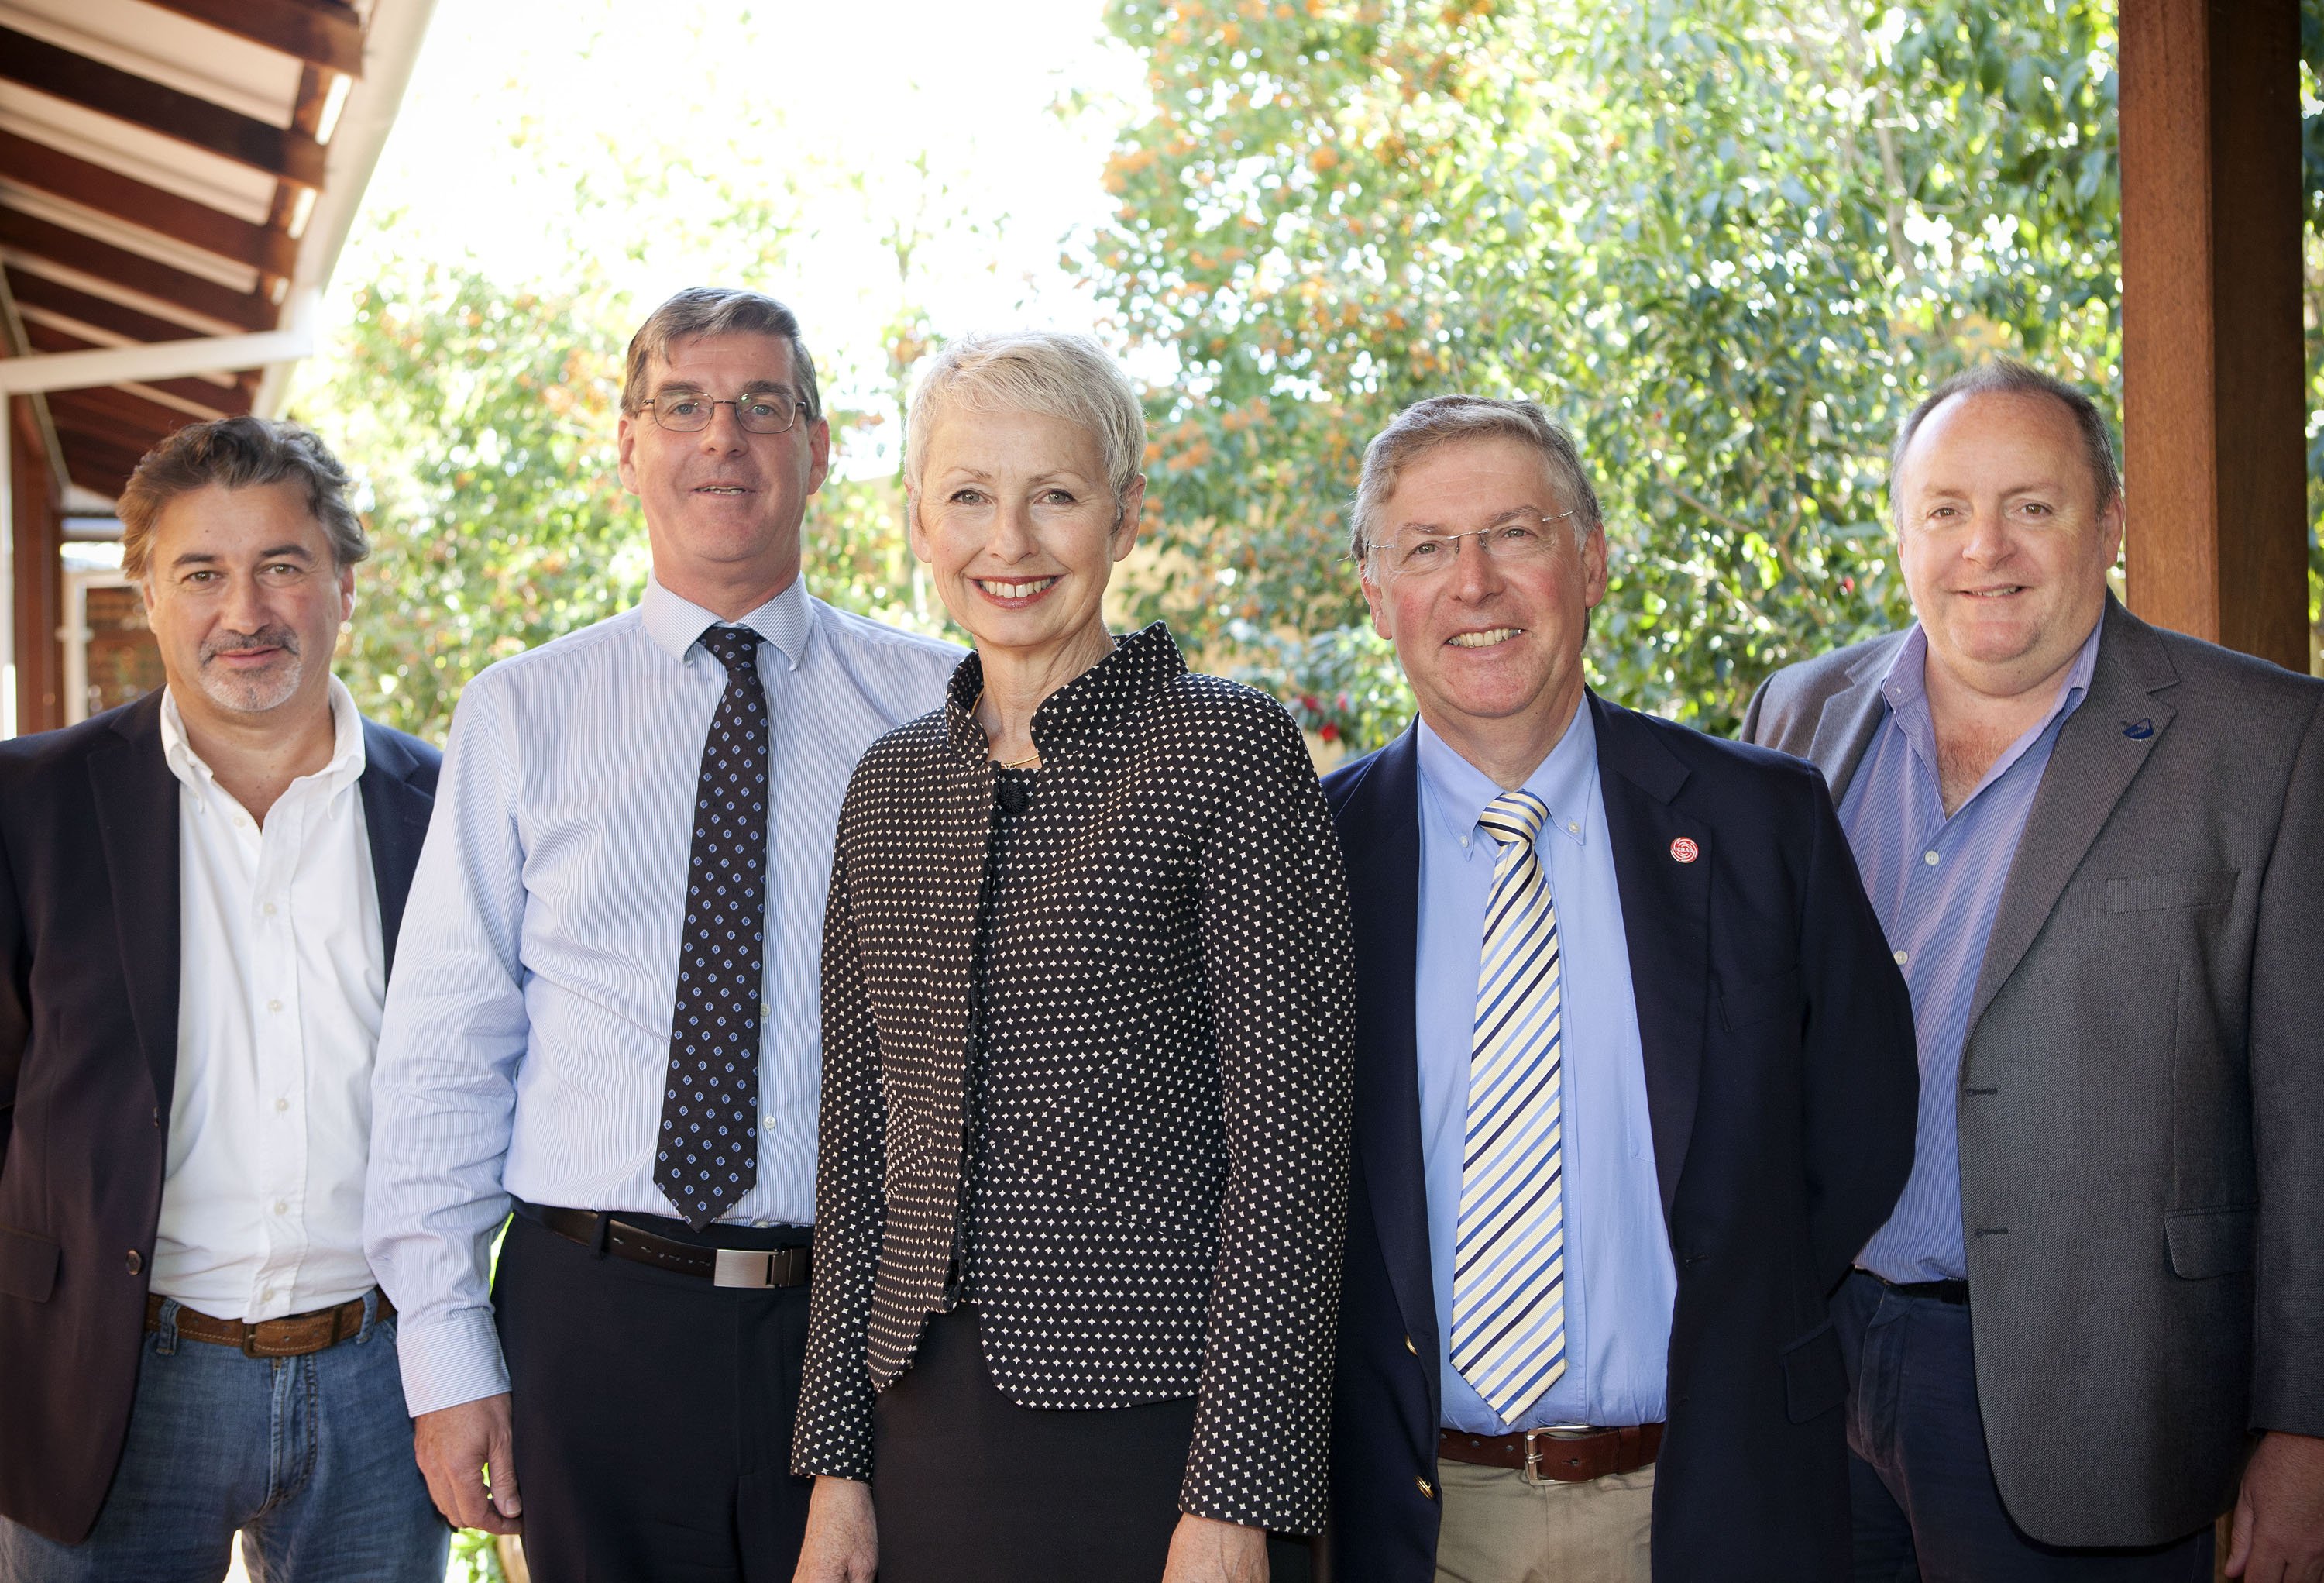 L-R: Professor Michael Garratt(ASTRON General Director), Professor Peter Hall (ICRAR Deputy Director, Engineering), Professor Jeanette Hacket (Vice Chancellor, Curtin University), Professor Peter Quinn (ICRAR Director) and Professor Phil Diamond (CSIRO Astronomy and Space Science Chief) at The Path to SKA-Low